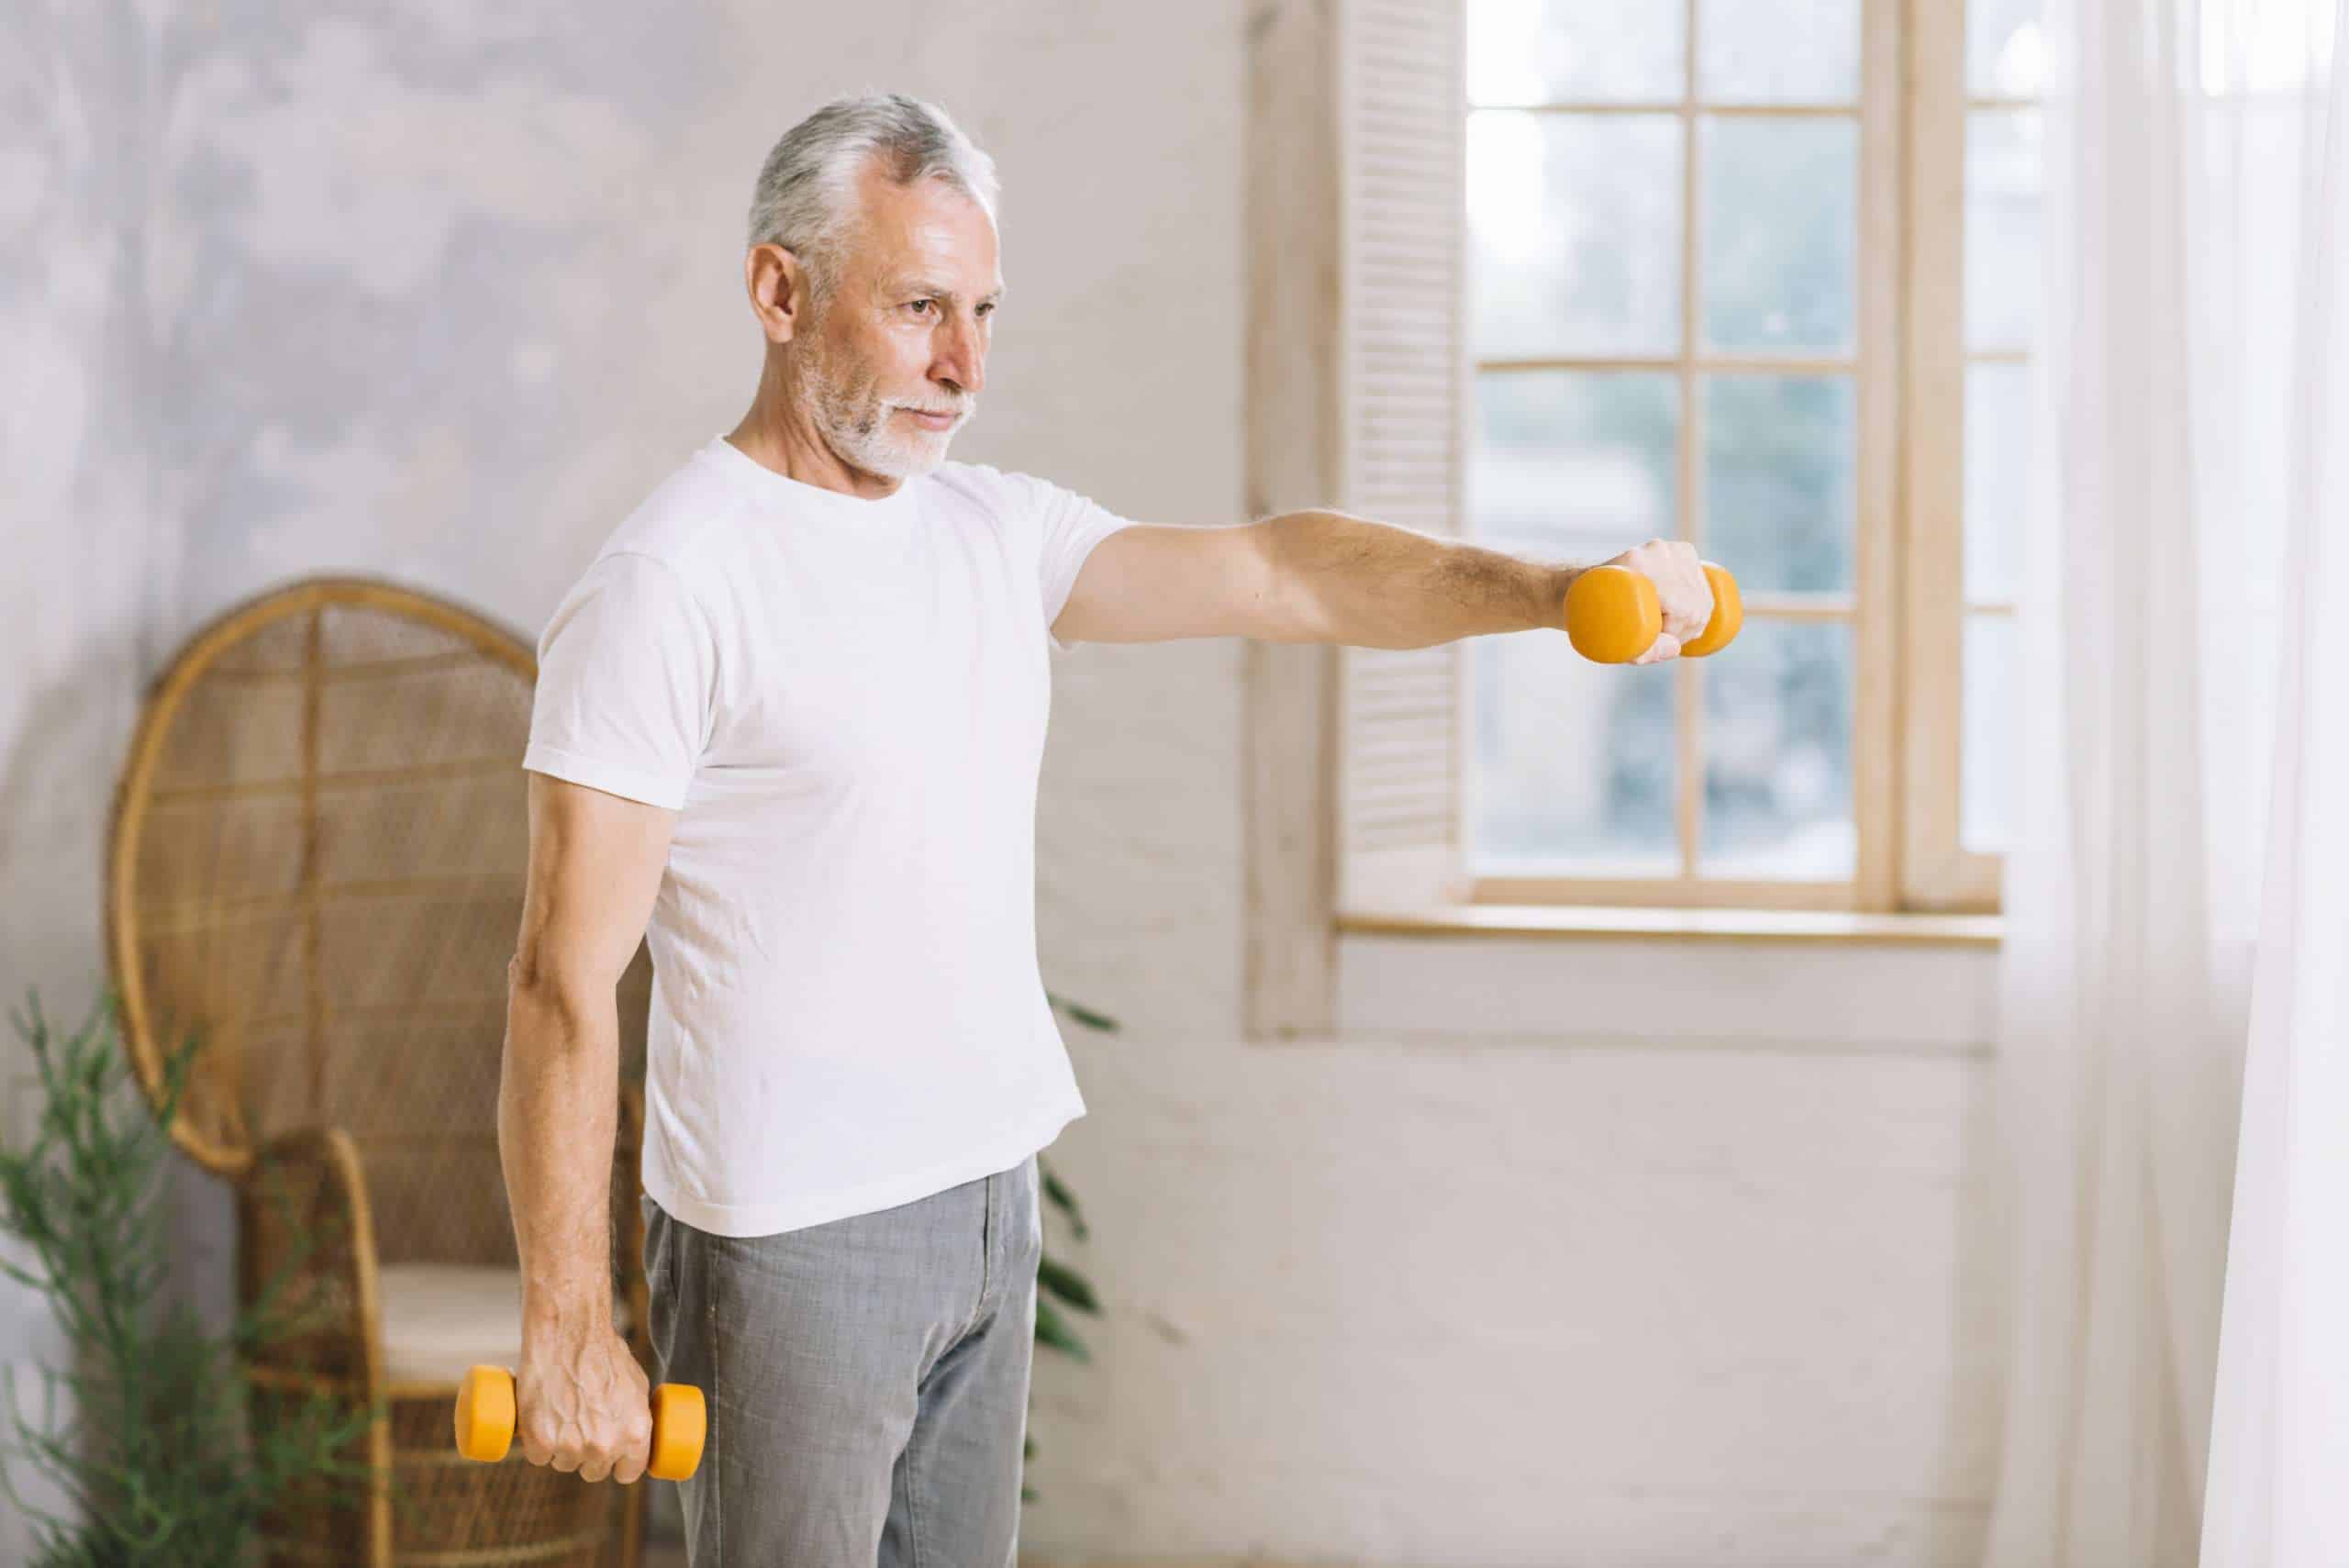 How do you keep your muscles fit after age 65?